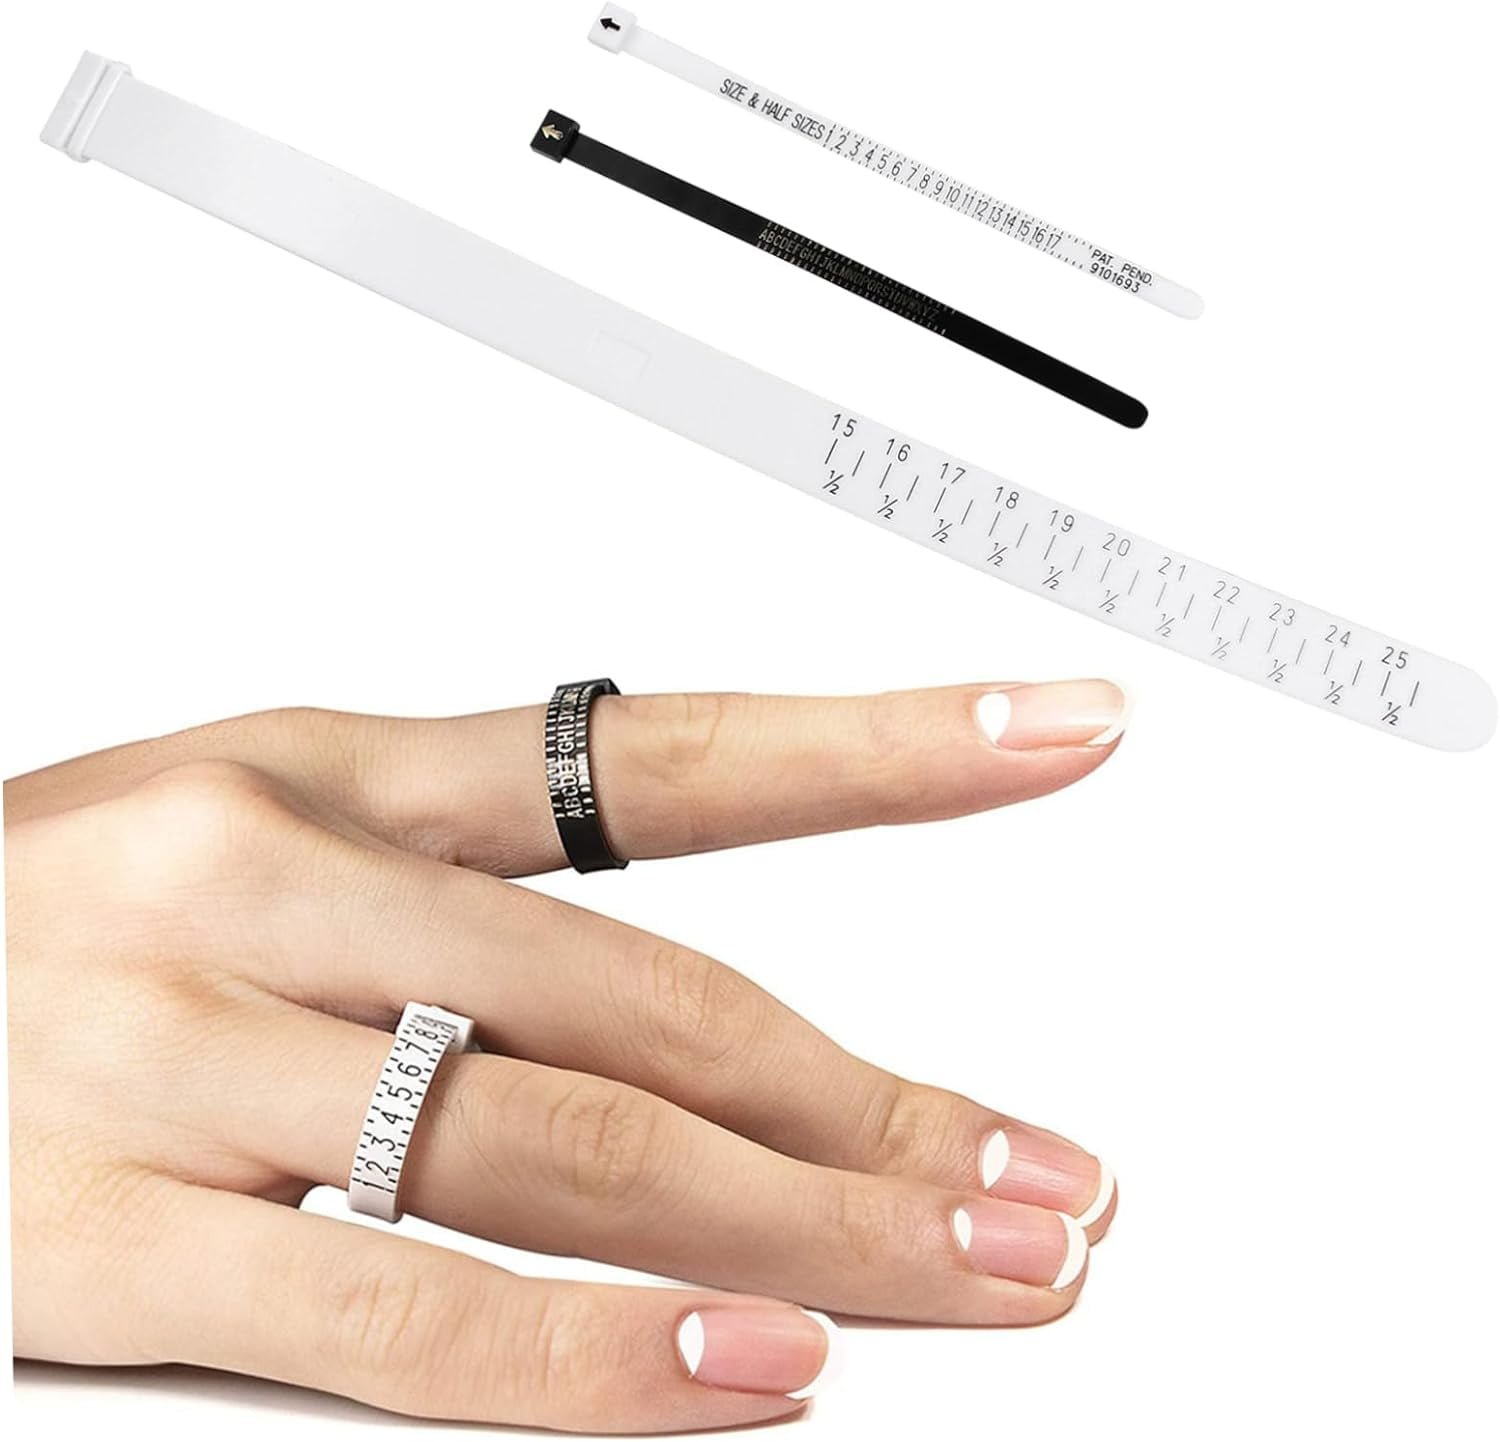 Ring Sizer Measuring Set Reusable Finger Size Gauge Measure Tool Jewelry  Sizing Tools 1-17 USA Rings Size: Buy Online at Best Price in UAE -  Amazon.ae